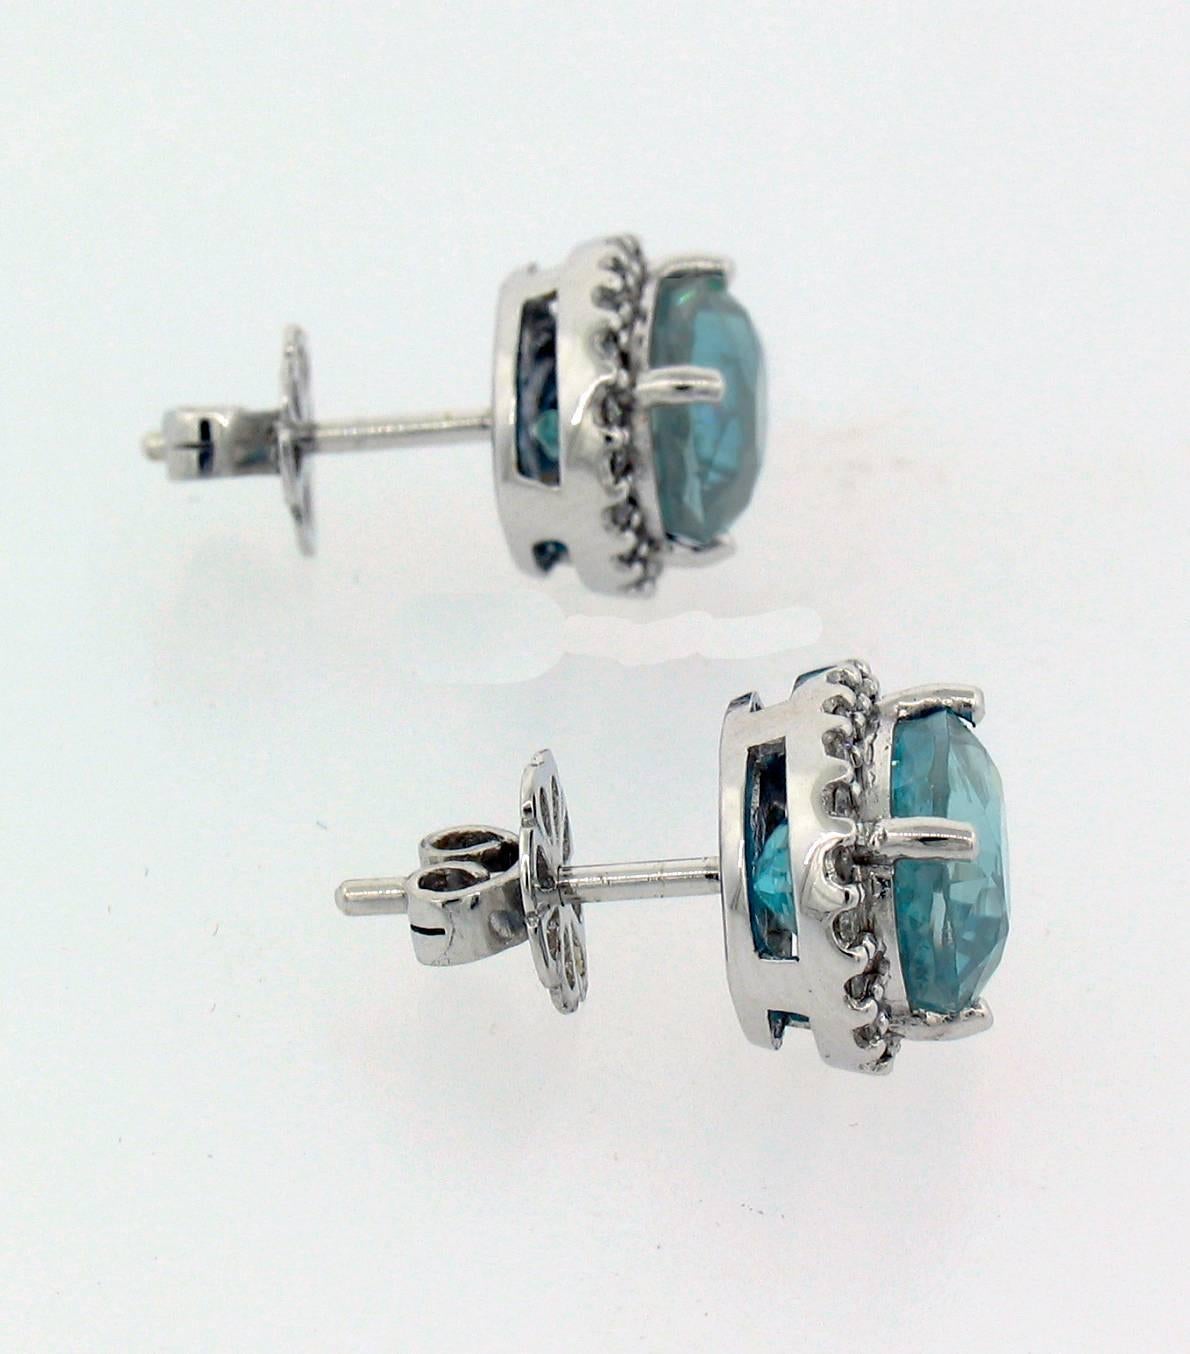 Natural Cambodian Blue Zircon stud earrings feature oval blue zircons weighing a total of 8.15 carats with a diamond halo weighing a total of 0.37 carats.  Set in 14k white gold, they measure 1/2" long x 7/16" wide x 5/16" deep.